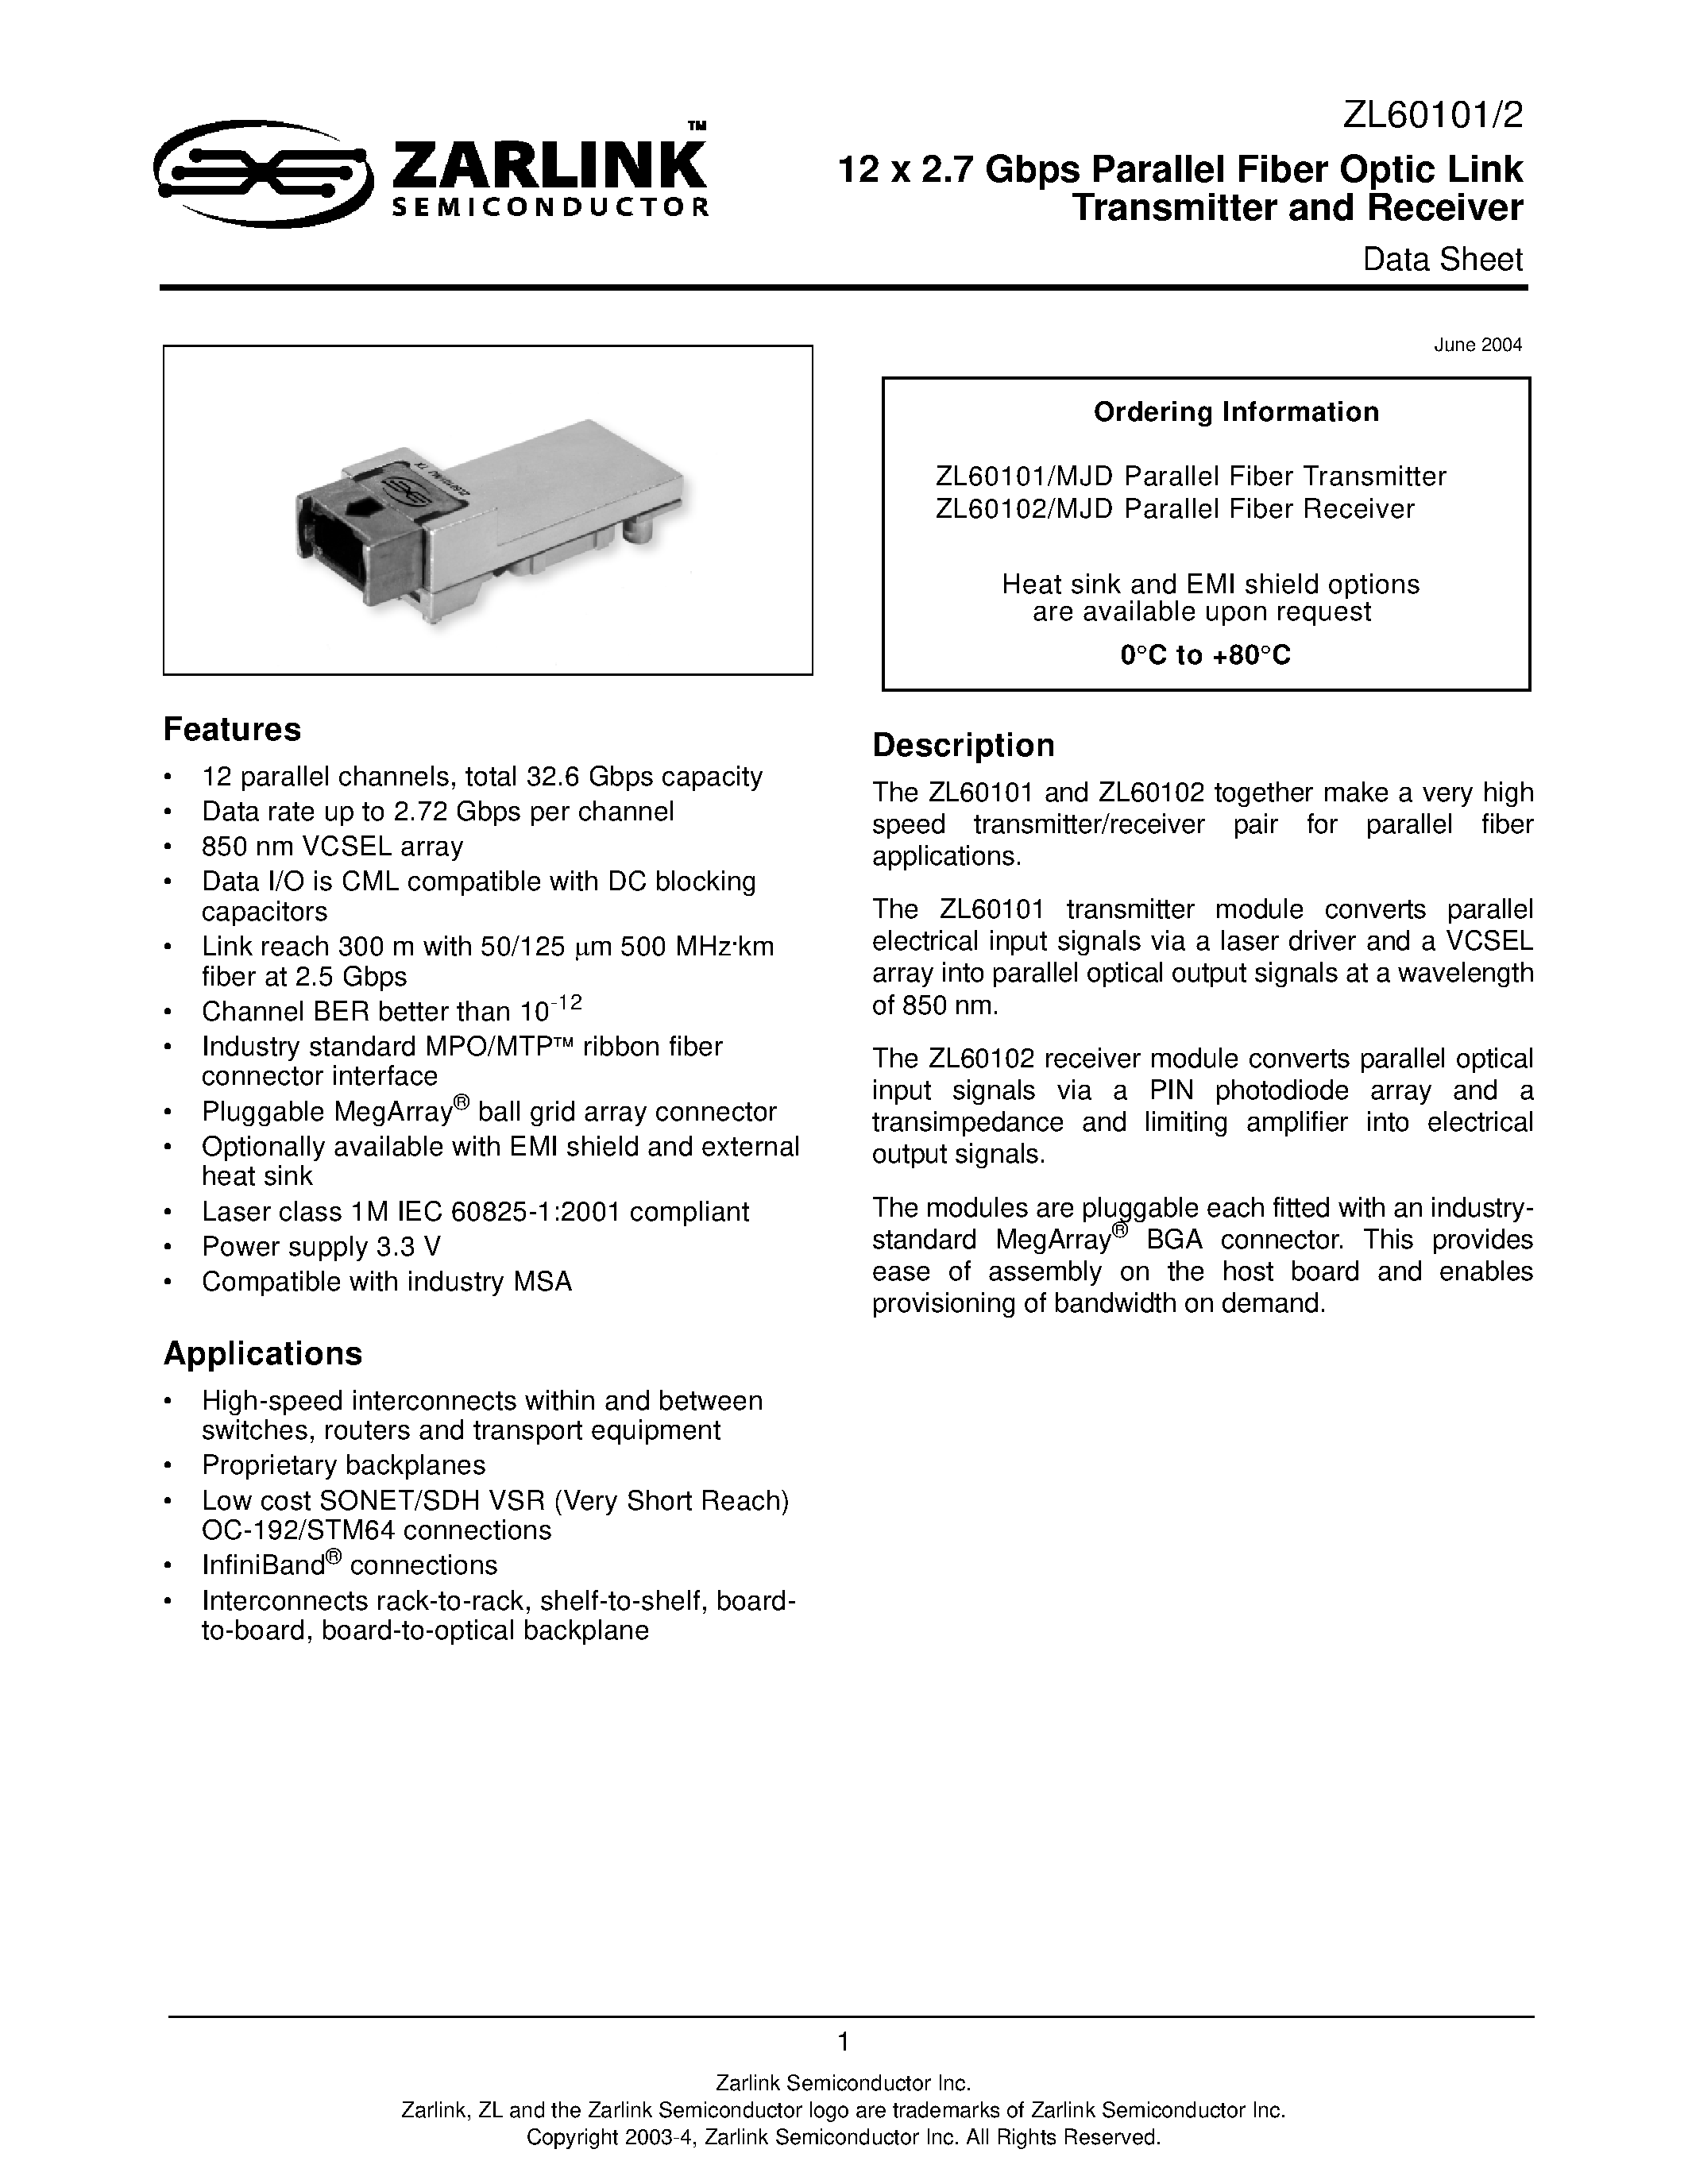 Datasheet ZL60101 - (ZL60101 / ZL60102) 12 x 2.7 Gbps Parallel Fiber Optic Link Transmitter and Receiver page 1